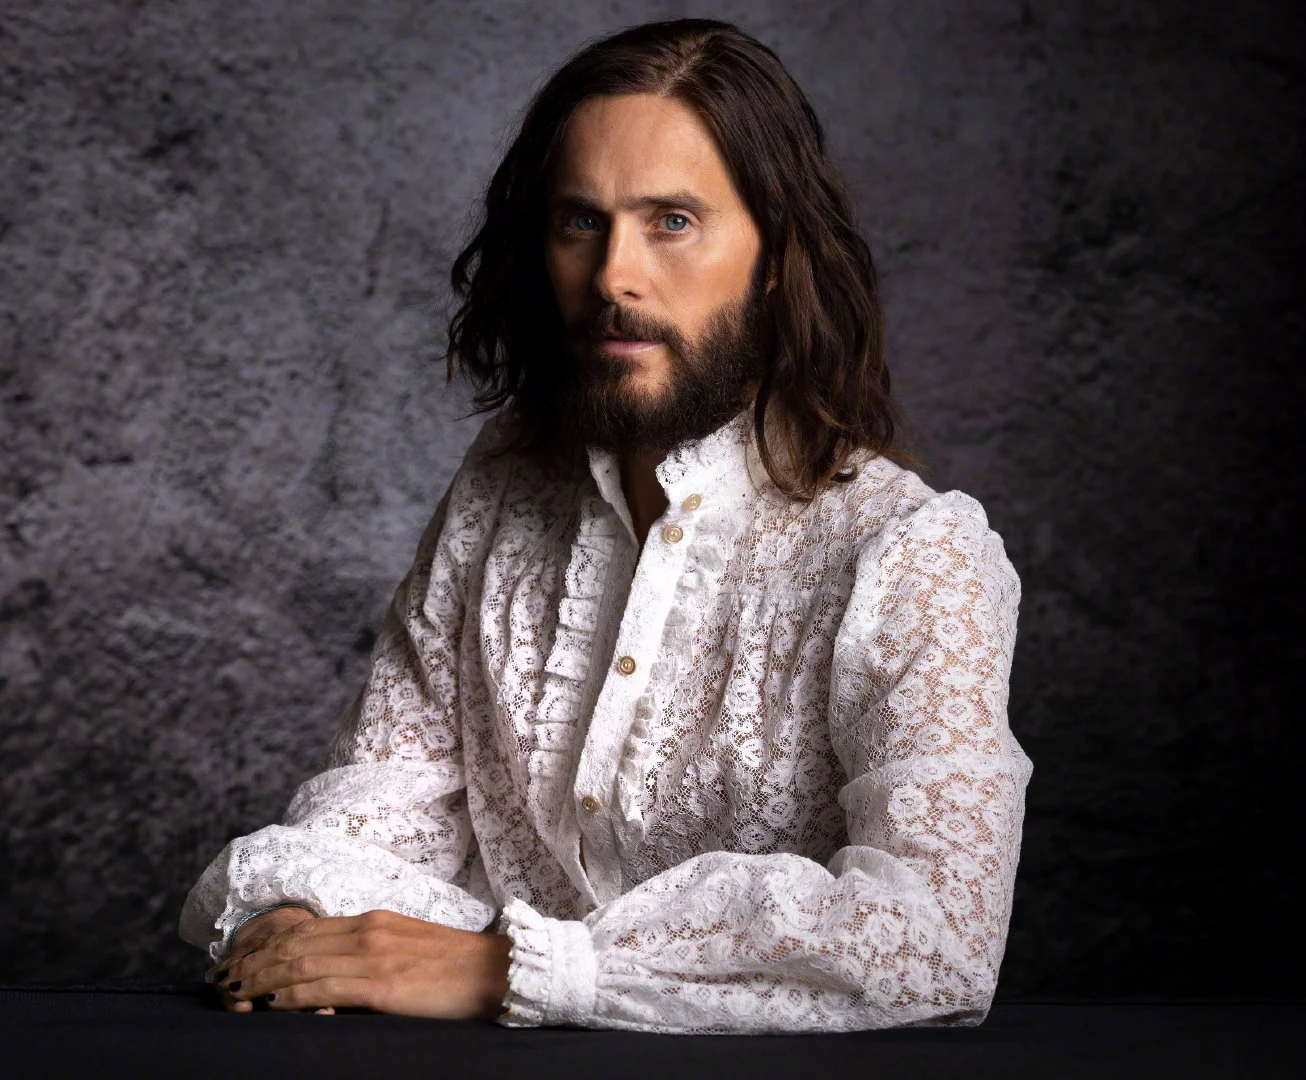 Jared Leto, USA Today's new photo ​​​